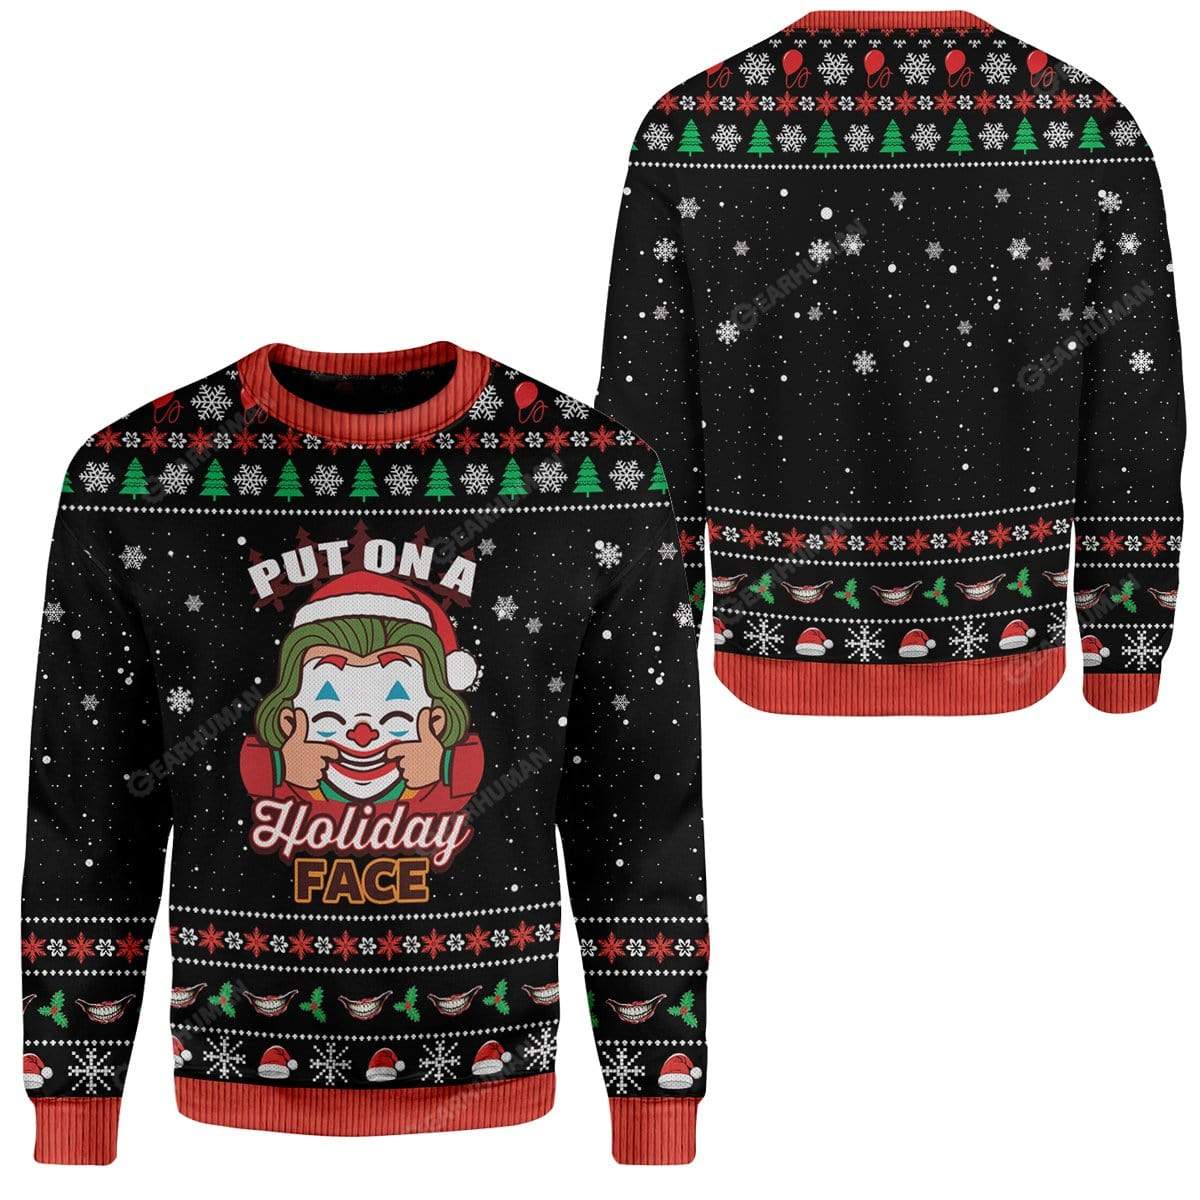 Ugly Christmas Put on a Holiday Face Sweater Apparel HD-QM2611196 Ugly Christmas Sweater 